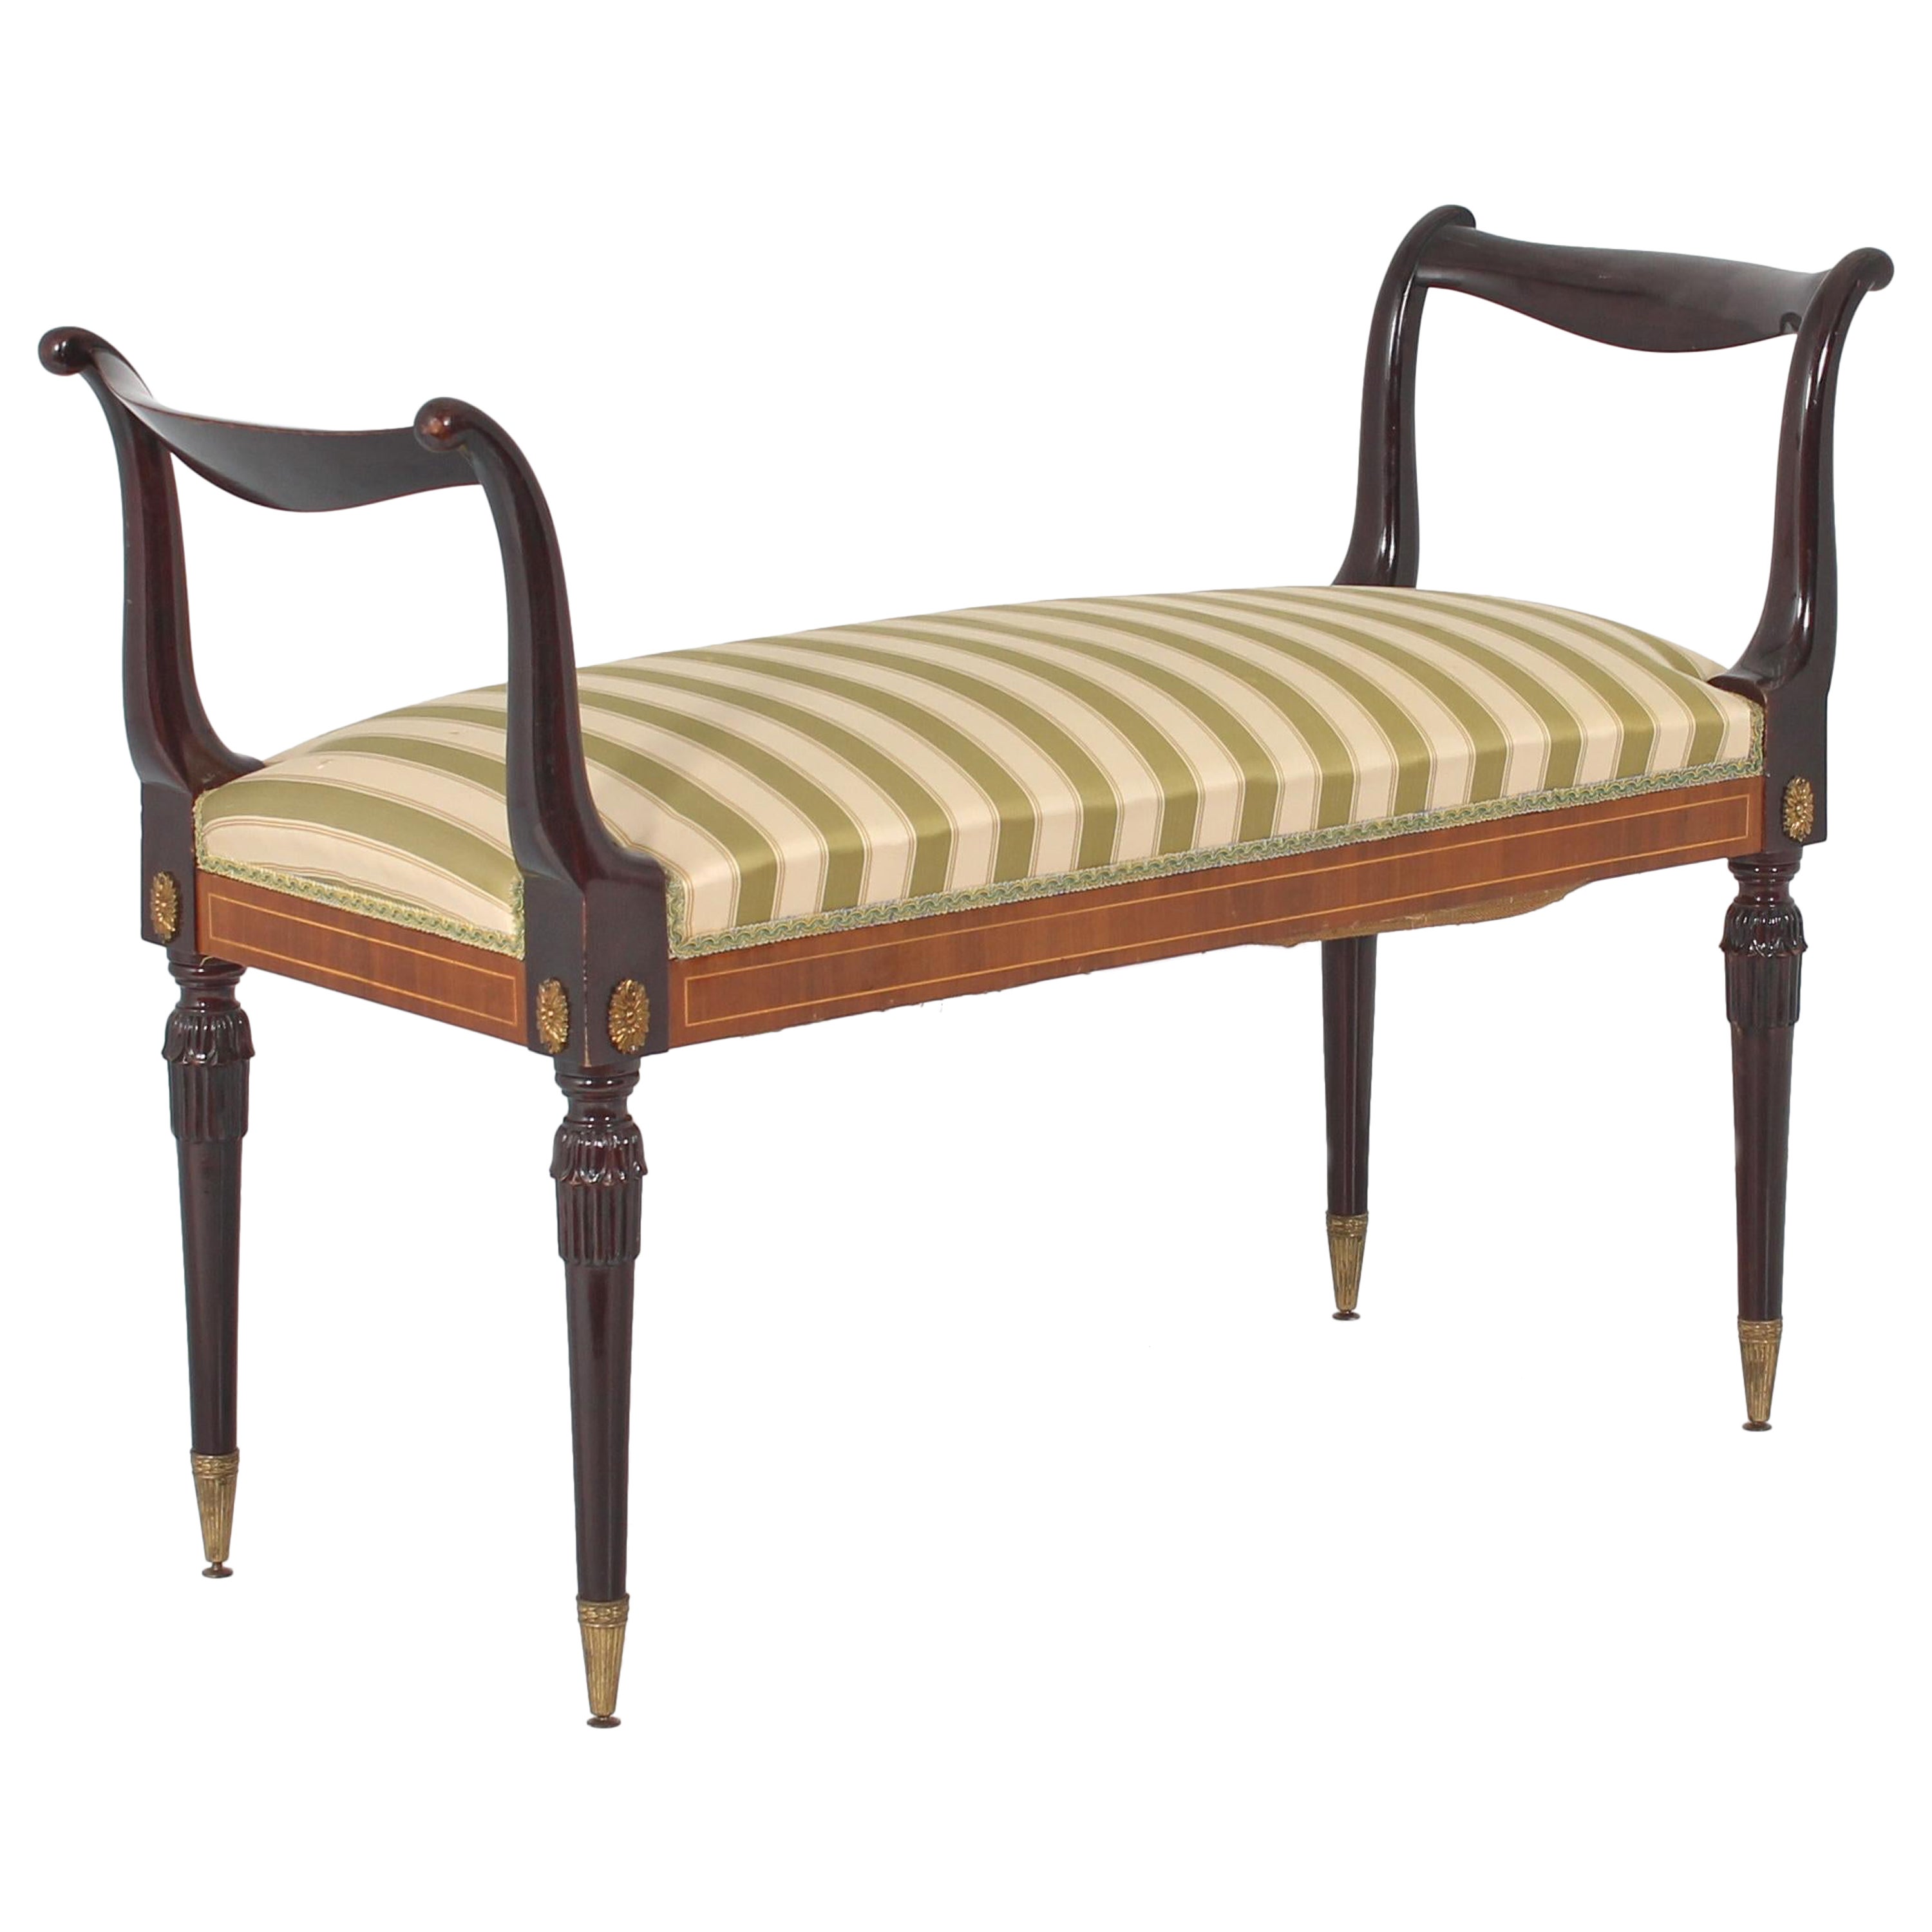 Mid-Century Emilio Lancia Wooden Bench with Striped Fabric , Italy, 1950s For Sale